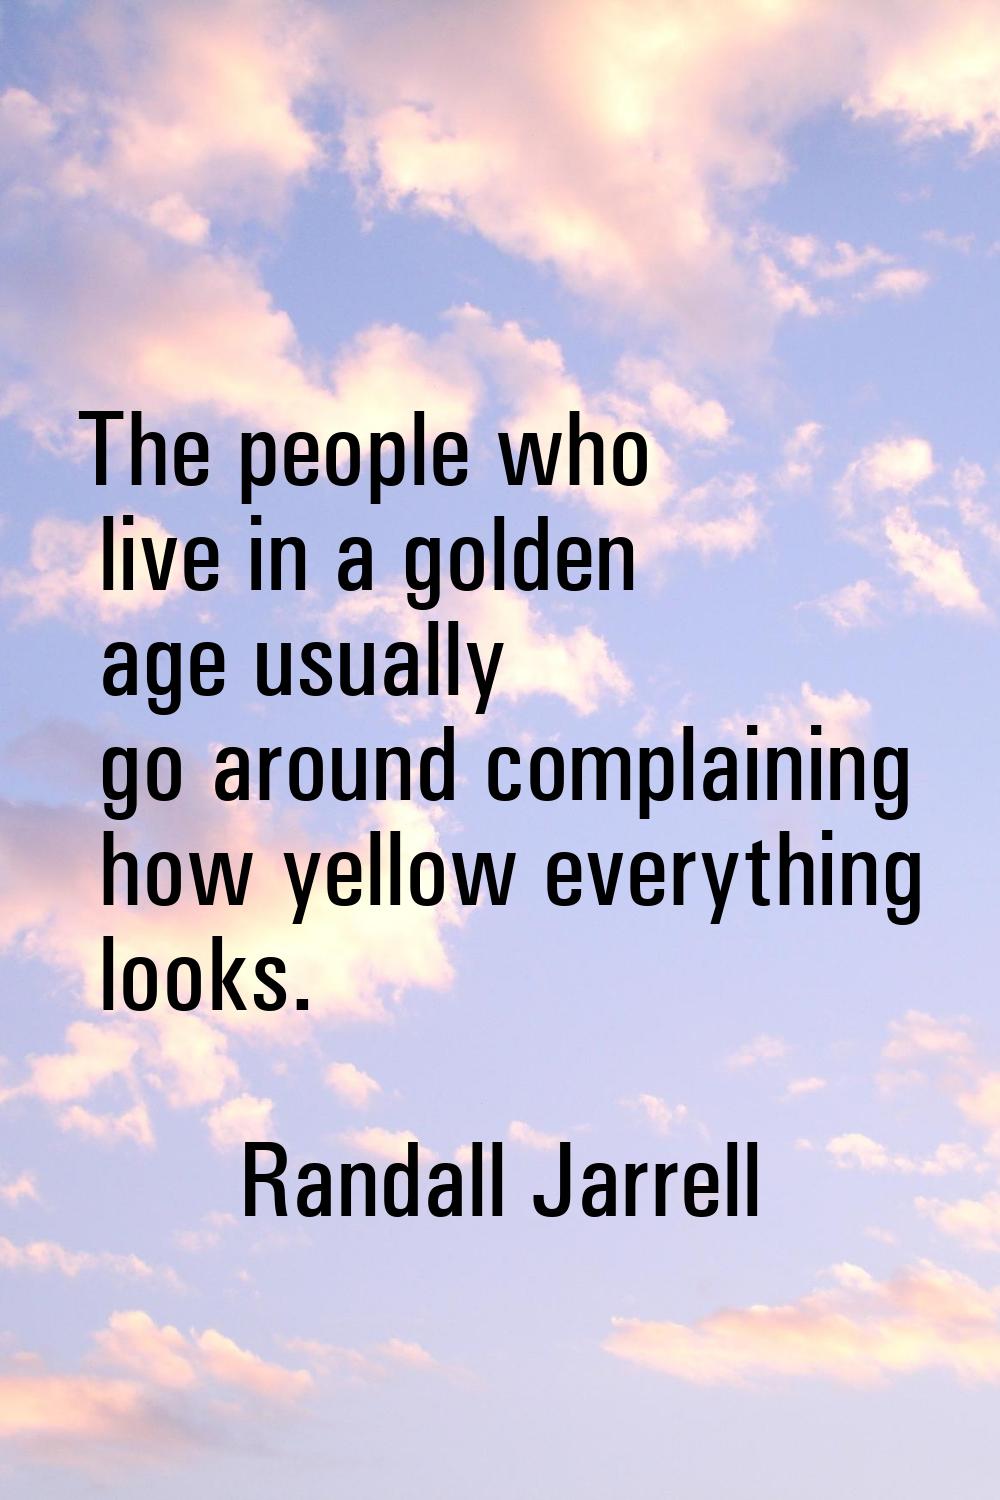 The people who live in a golden age usually go around complaining how yellow everything looks.